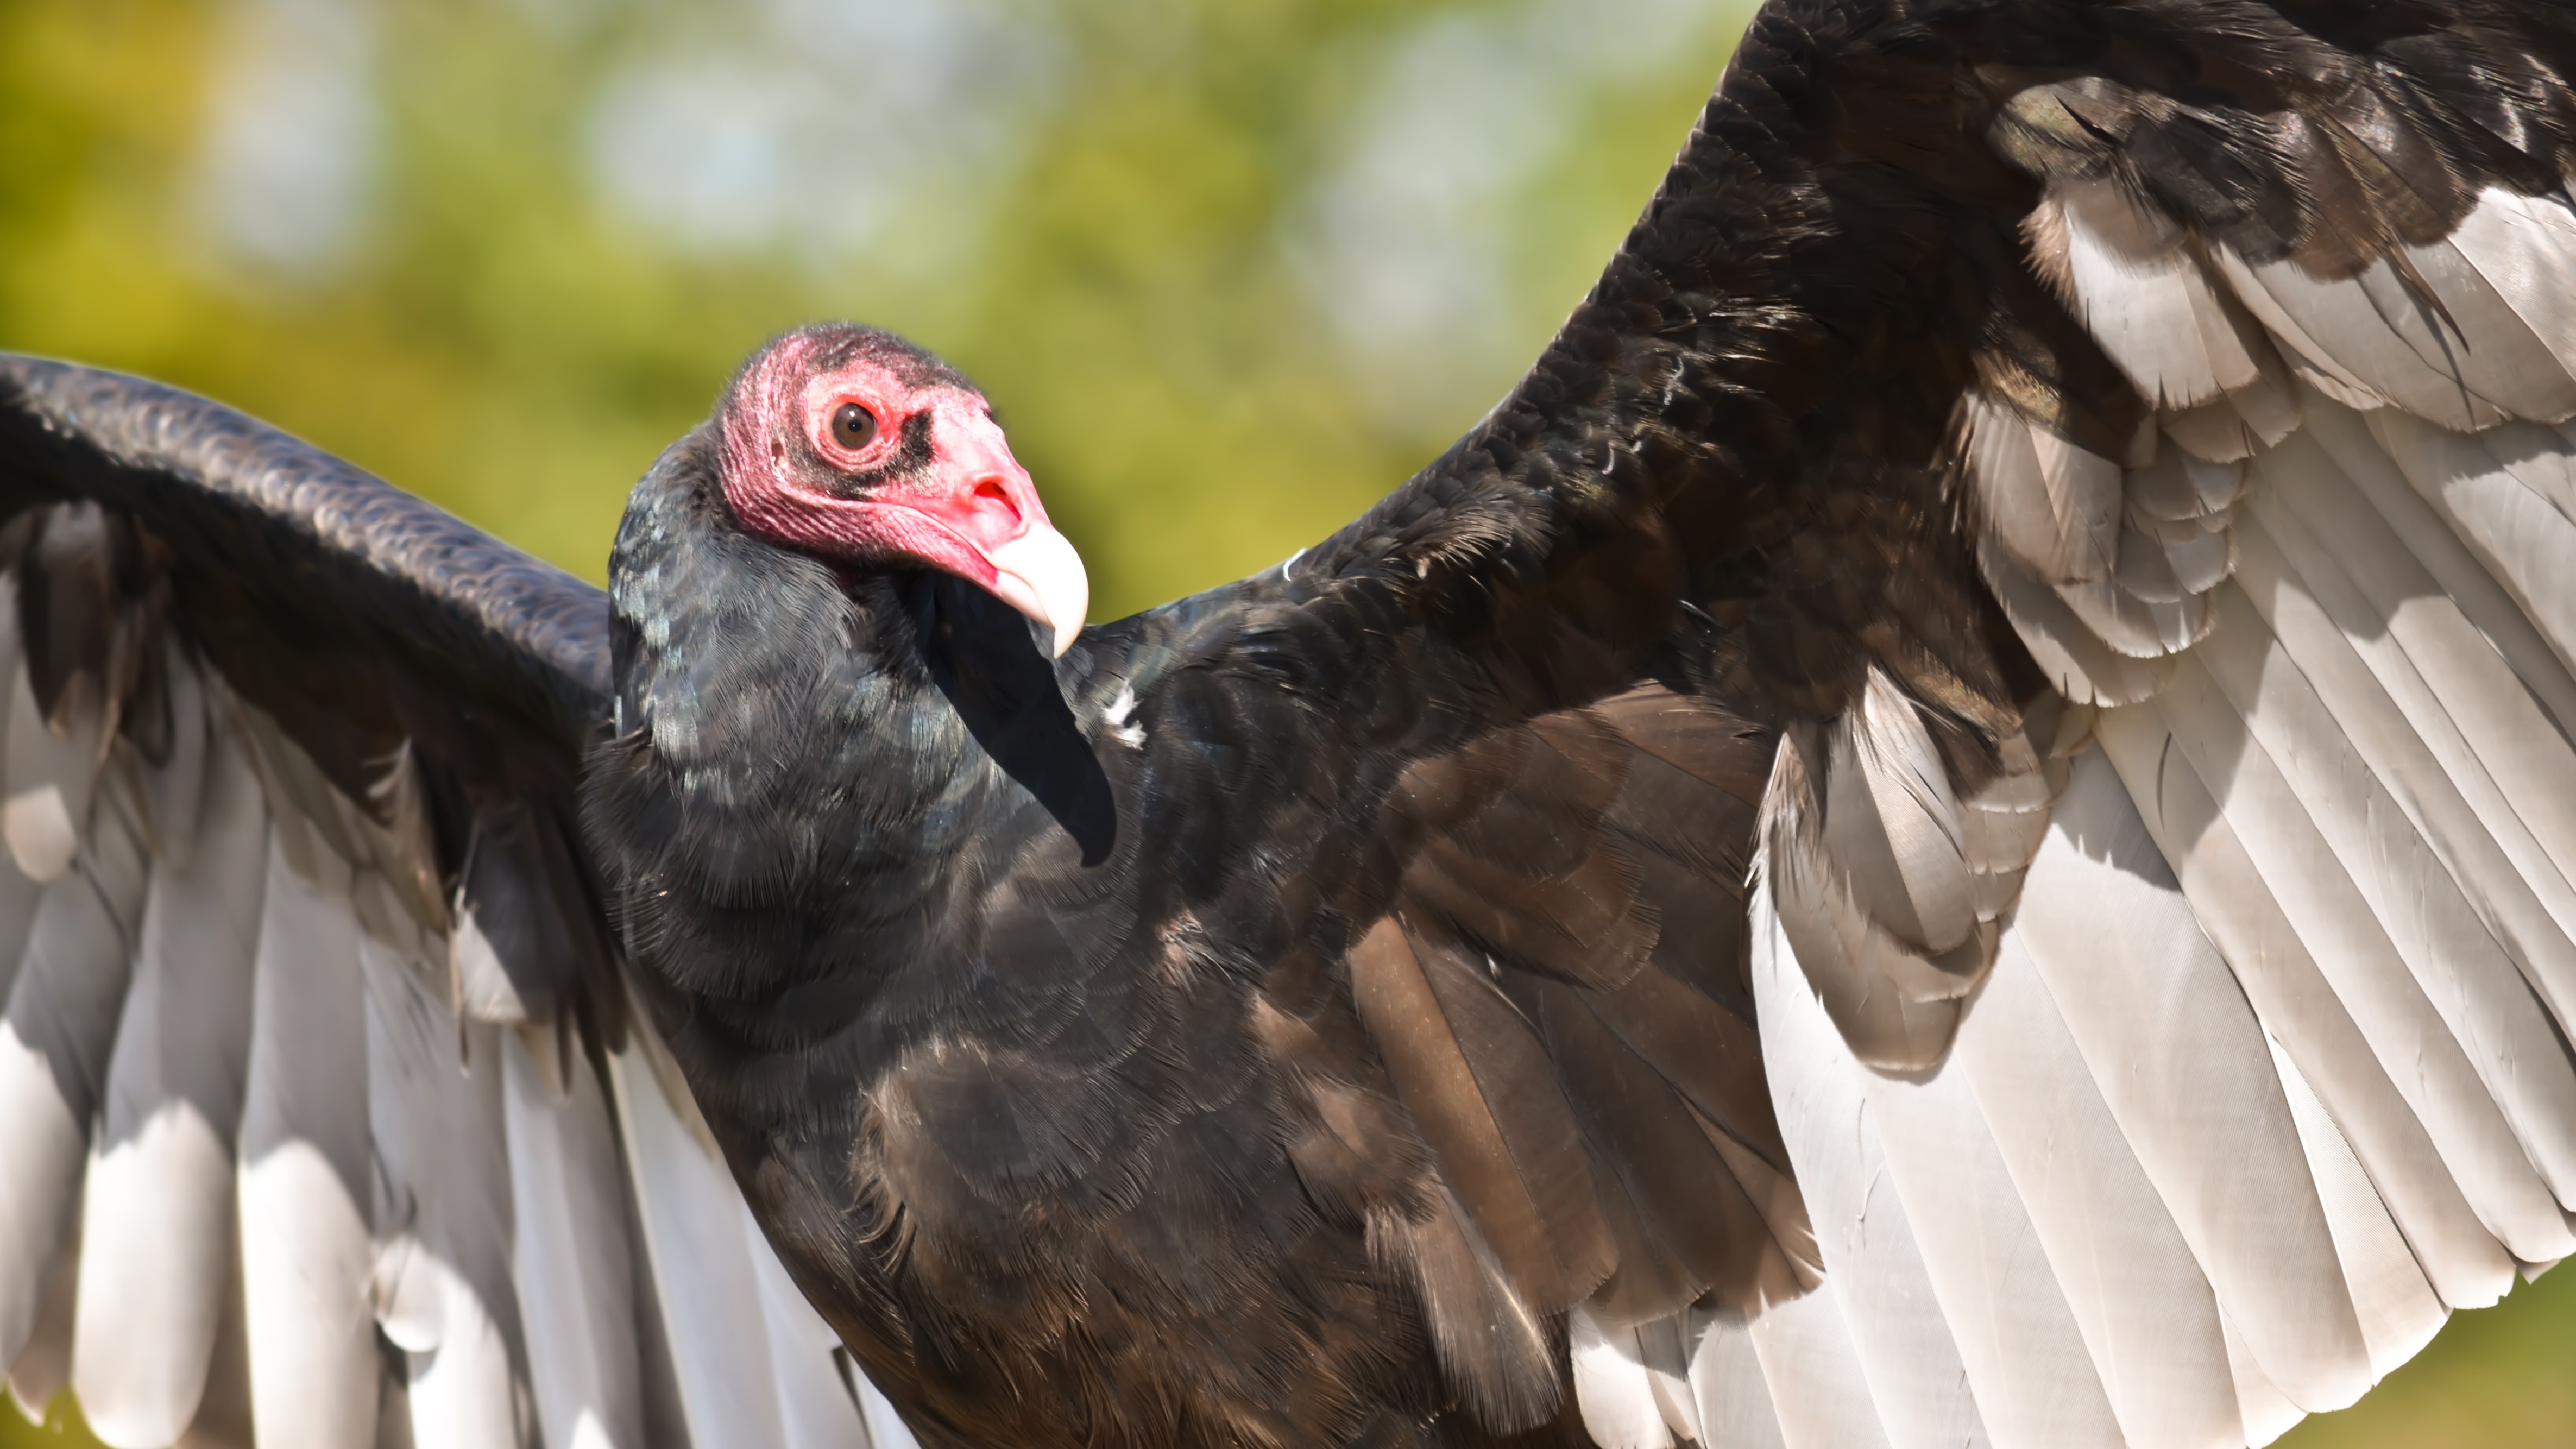 A turkey vulture spreading its wings.